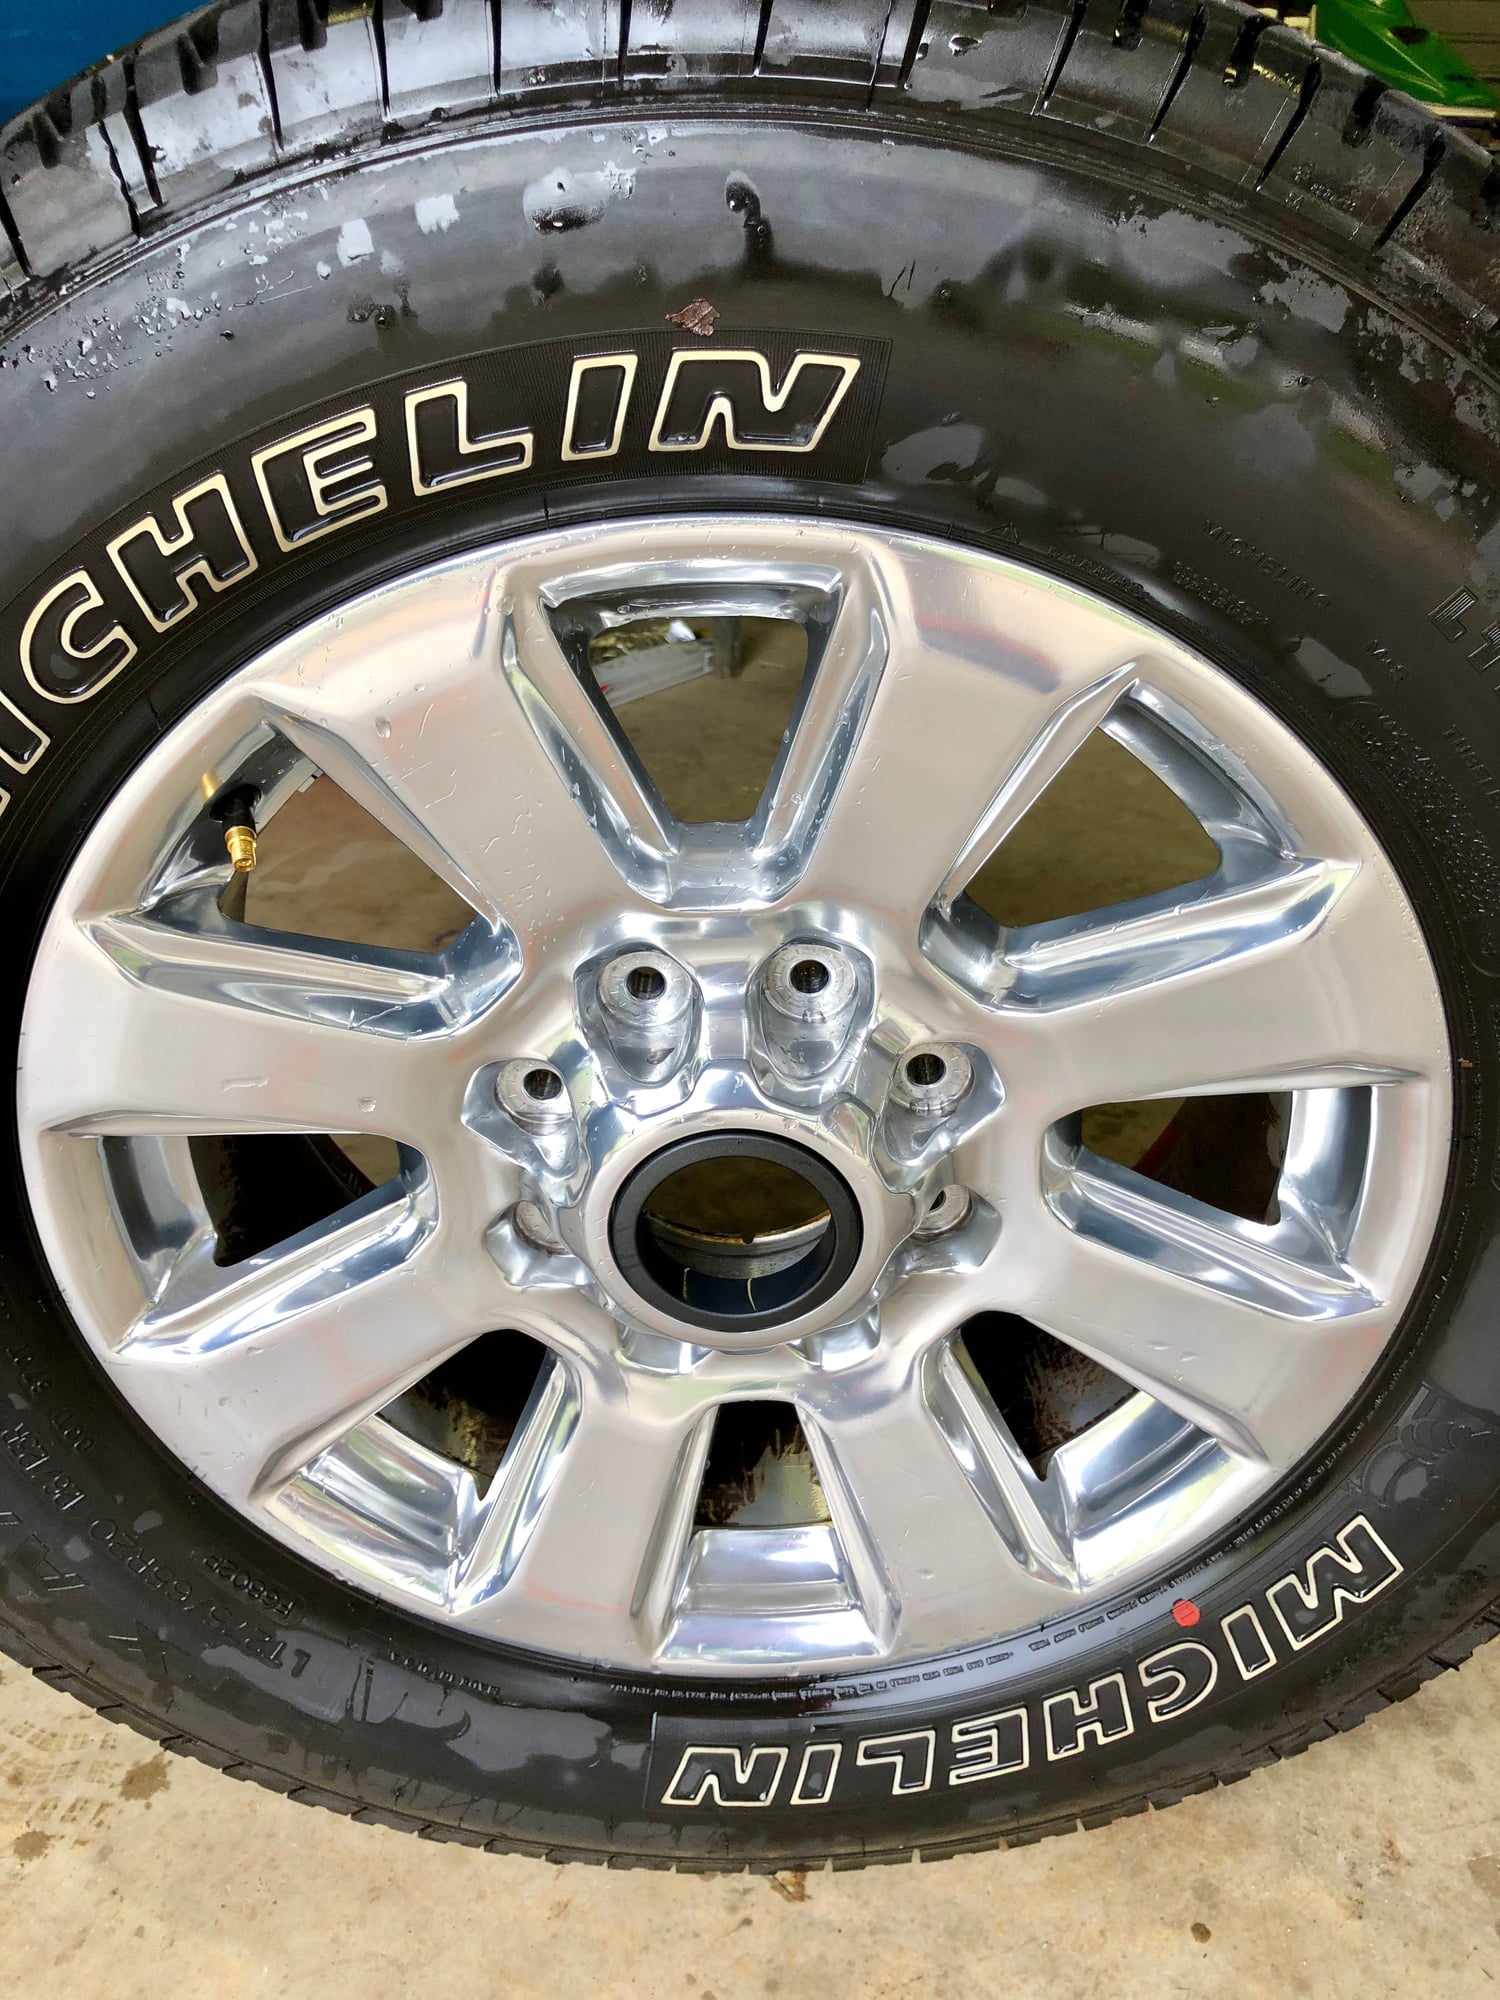 Wheels and Tires/Axles - 2018 F250 Platinum Polished Aluminum 20" Wheels and Tires - Used - 2018 Ford F-250 Super Duty - Tupelo, MS 38801, United States